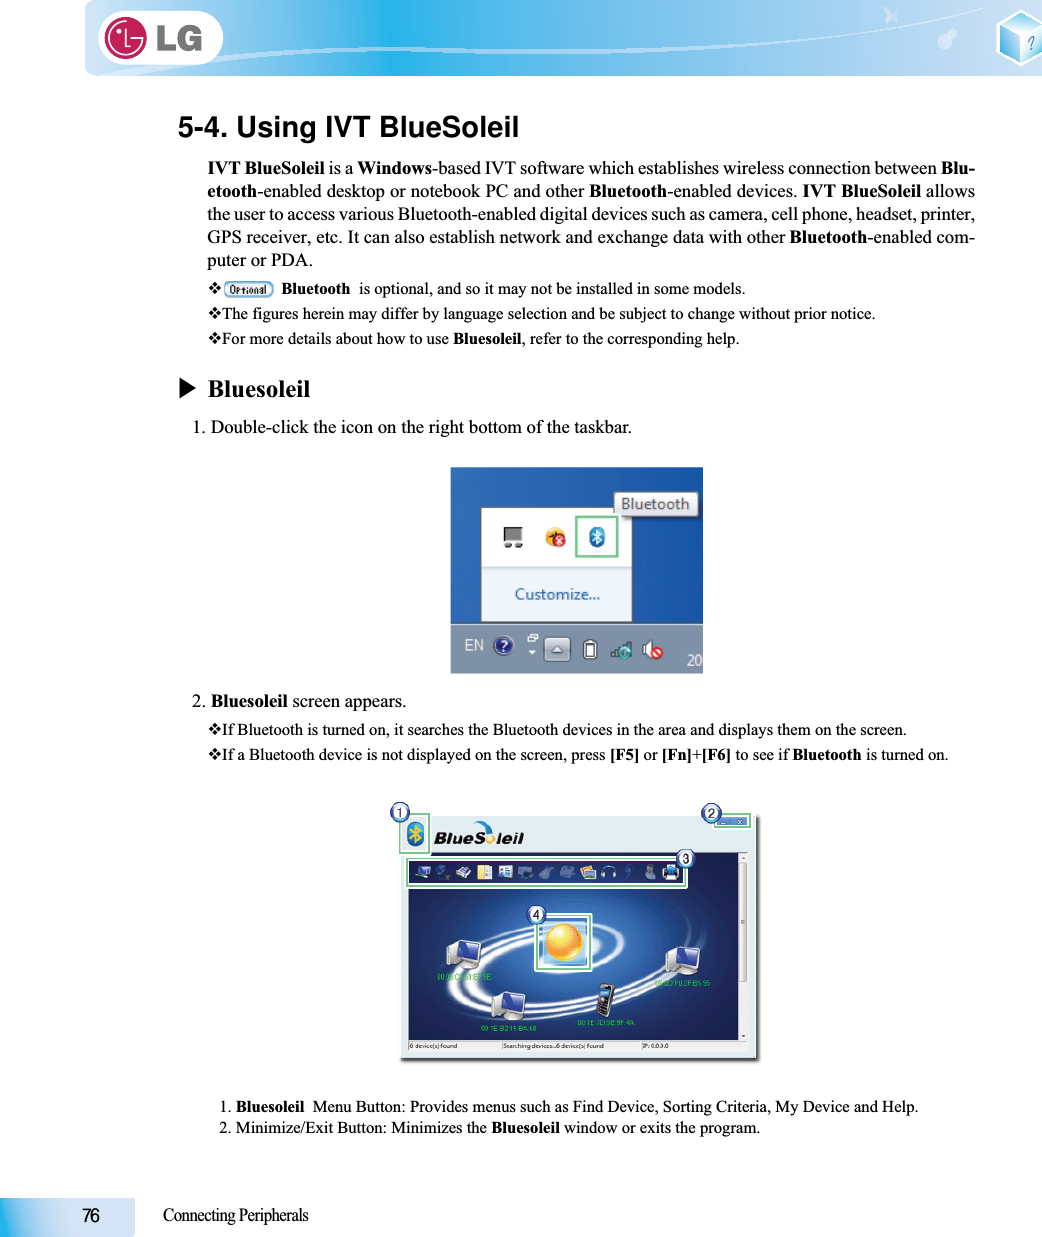 Connecting Peripherals5-4. Using IVT BlueSoleilIVT BlueSoleil is a Windows-based IVT software which establishes wireless connection between Blu-etooth-enabled desktop or notebook PC and other Bluetooth-enabled devices. IVT BlueSoleil allowsthe user to access various Bluetooth-enabled digital devices such as camera, cell phone, headset, printer,GPS receiver, etc. It can also establish network and exchange data with other Bluetooth-enabled com-puter or PDA.Bluetooth  is optional, and so it may not be installed in some models.The figures herein may differ by language selection and be subject to change without prior notice.For more details about how to use Bluesoleil, refer to the corresponding help.XBluesoleil1. Double-click the icon on the right bottom of the taskbar.2. Bluesoleil screen appears.If Bluetooth is turned on, it searches the Bluetooth devices in the area and displays them on the screen.If a Bluetooth device is not displayed on the screen, press [F5] or [Fn]+[F6] to see if Bluetooth is turned on.1. Bluesoleil  Menu Button: Provides menus such as Find Device, Sorting Criteria, My Device and Help.2. Minimize/Exit Button: Minimizes the Bluesoleil window or exits the program.